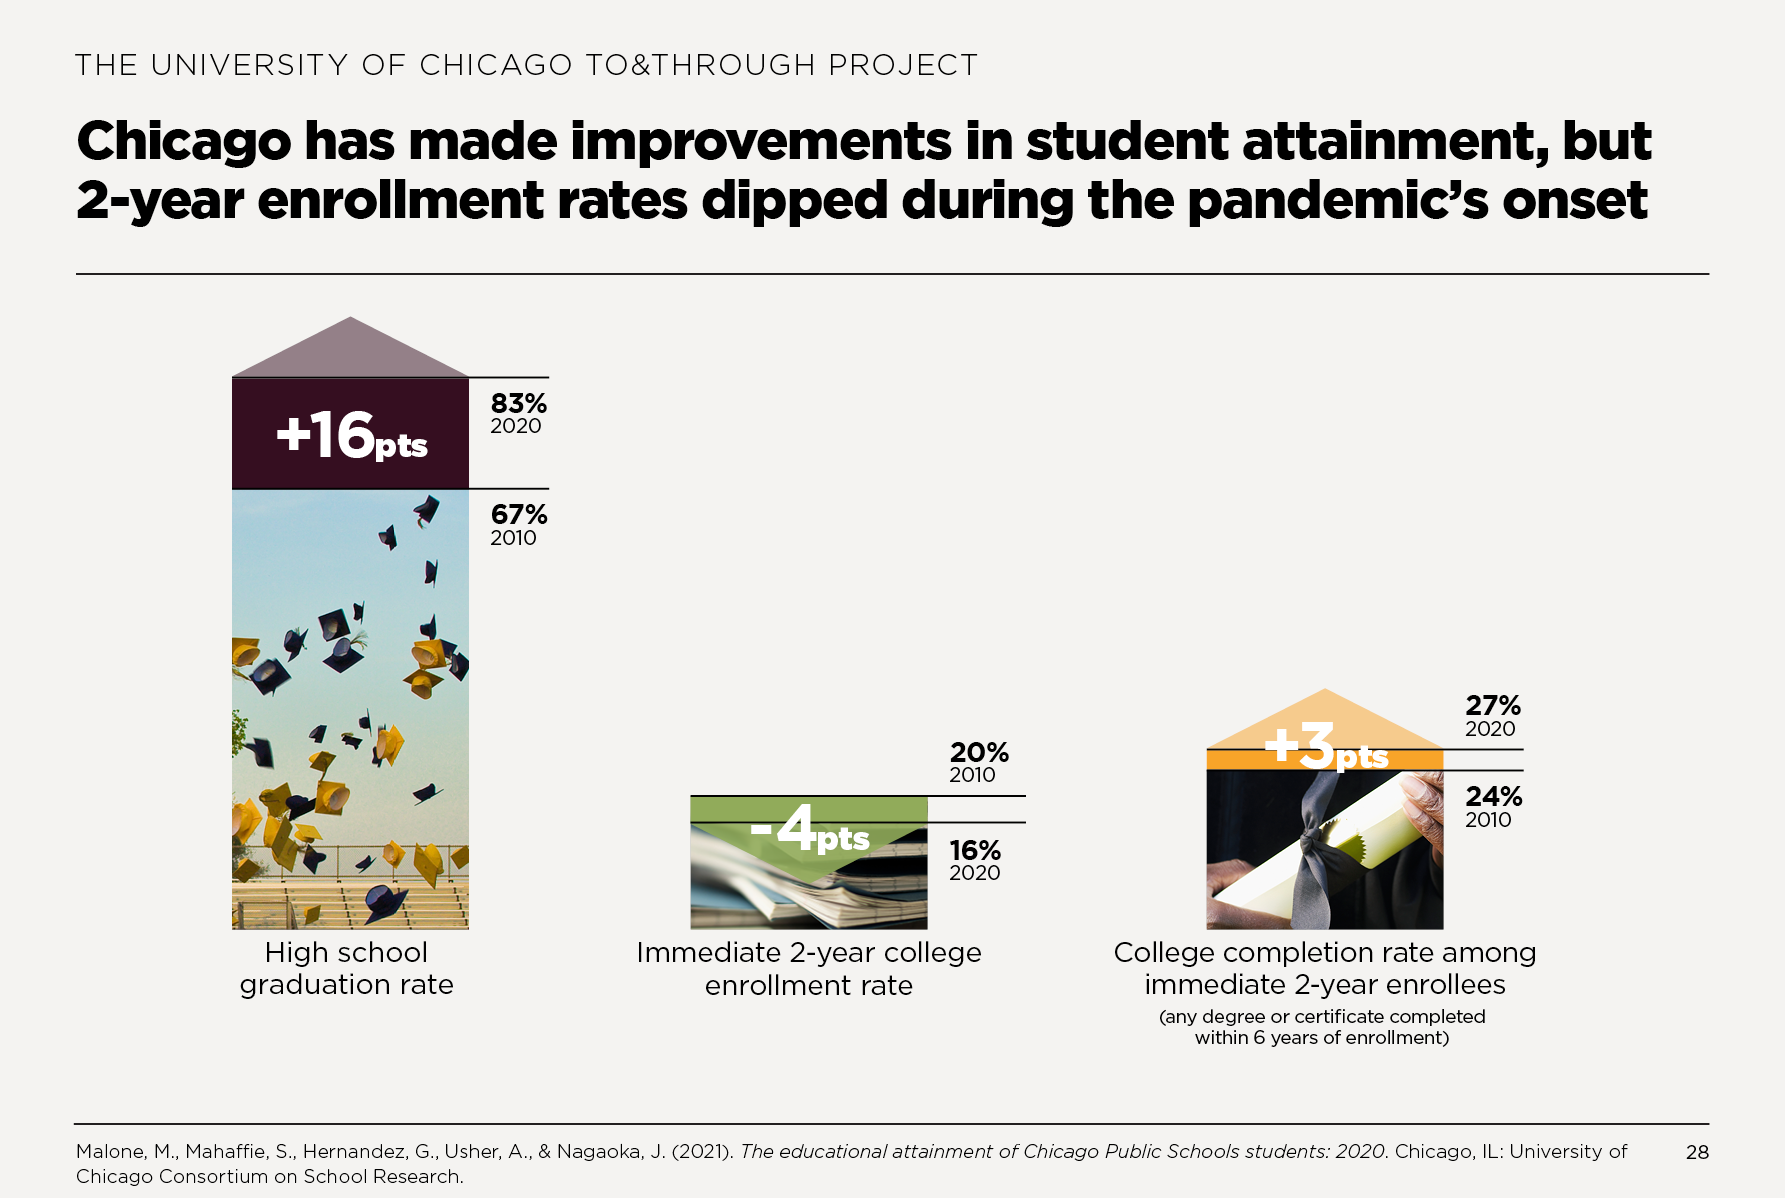 Chicago has made improvements in student attainment, but 2-year enrollment rates dipped during the pandemic’s onset